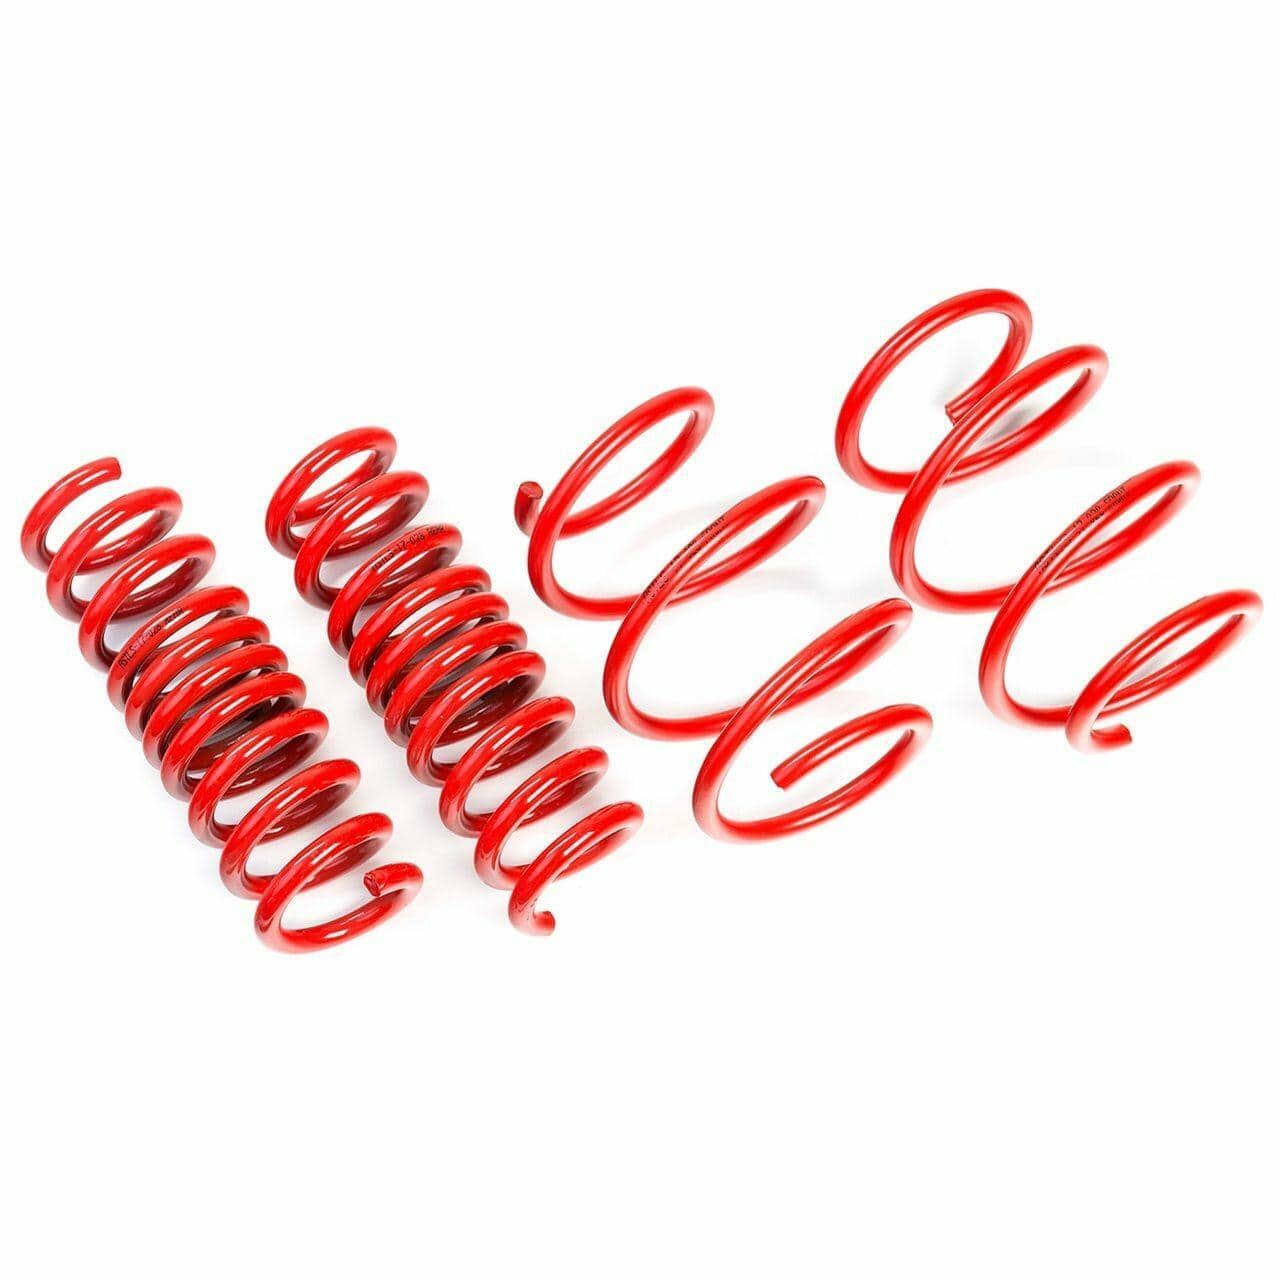 AST Suspension Lowering Springs (70MM/20MM) - 1990-1992 BMW 3 Series 320i/325i/325TD/325TDS/328i Compact/Coupe (E36) ASTLS-14-354